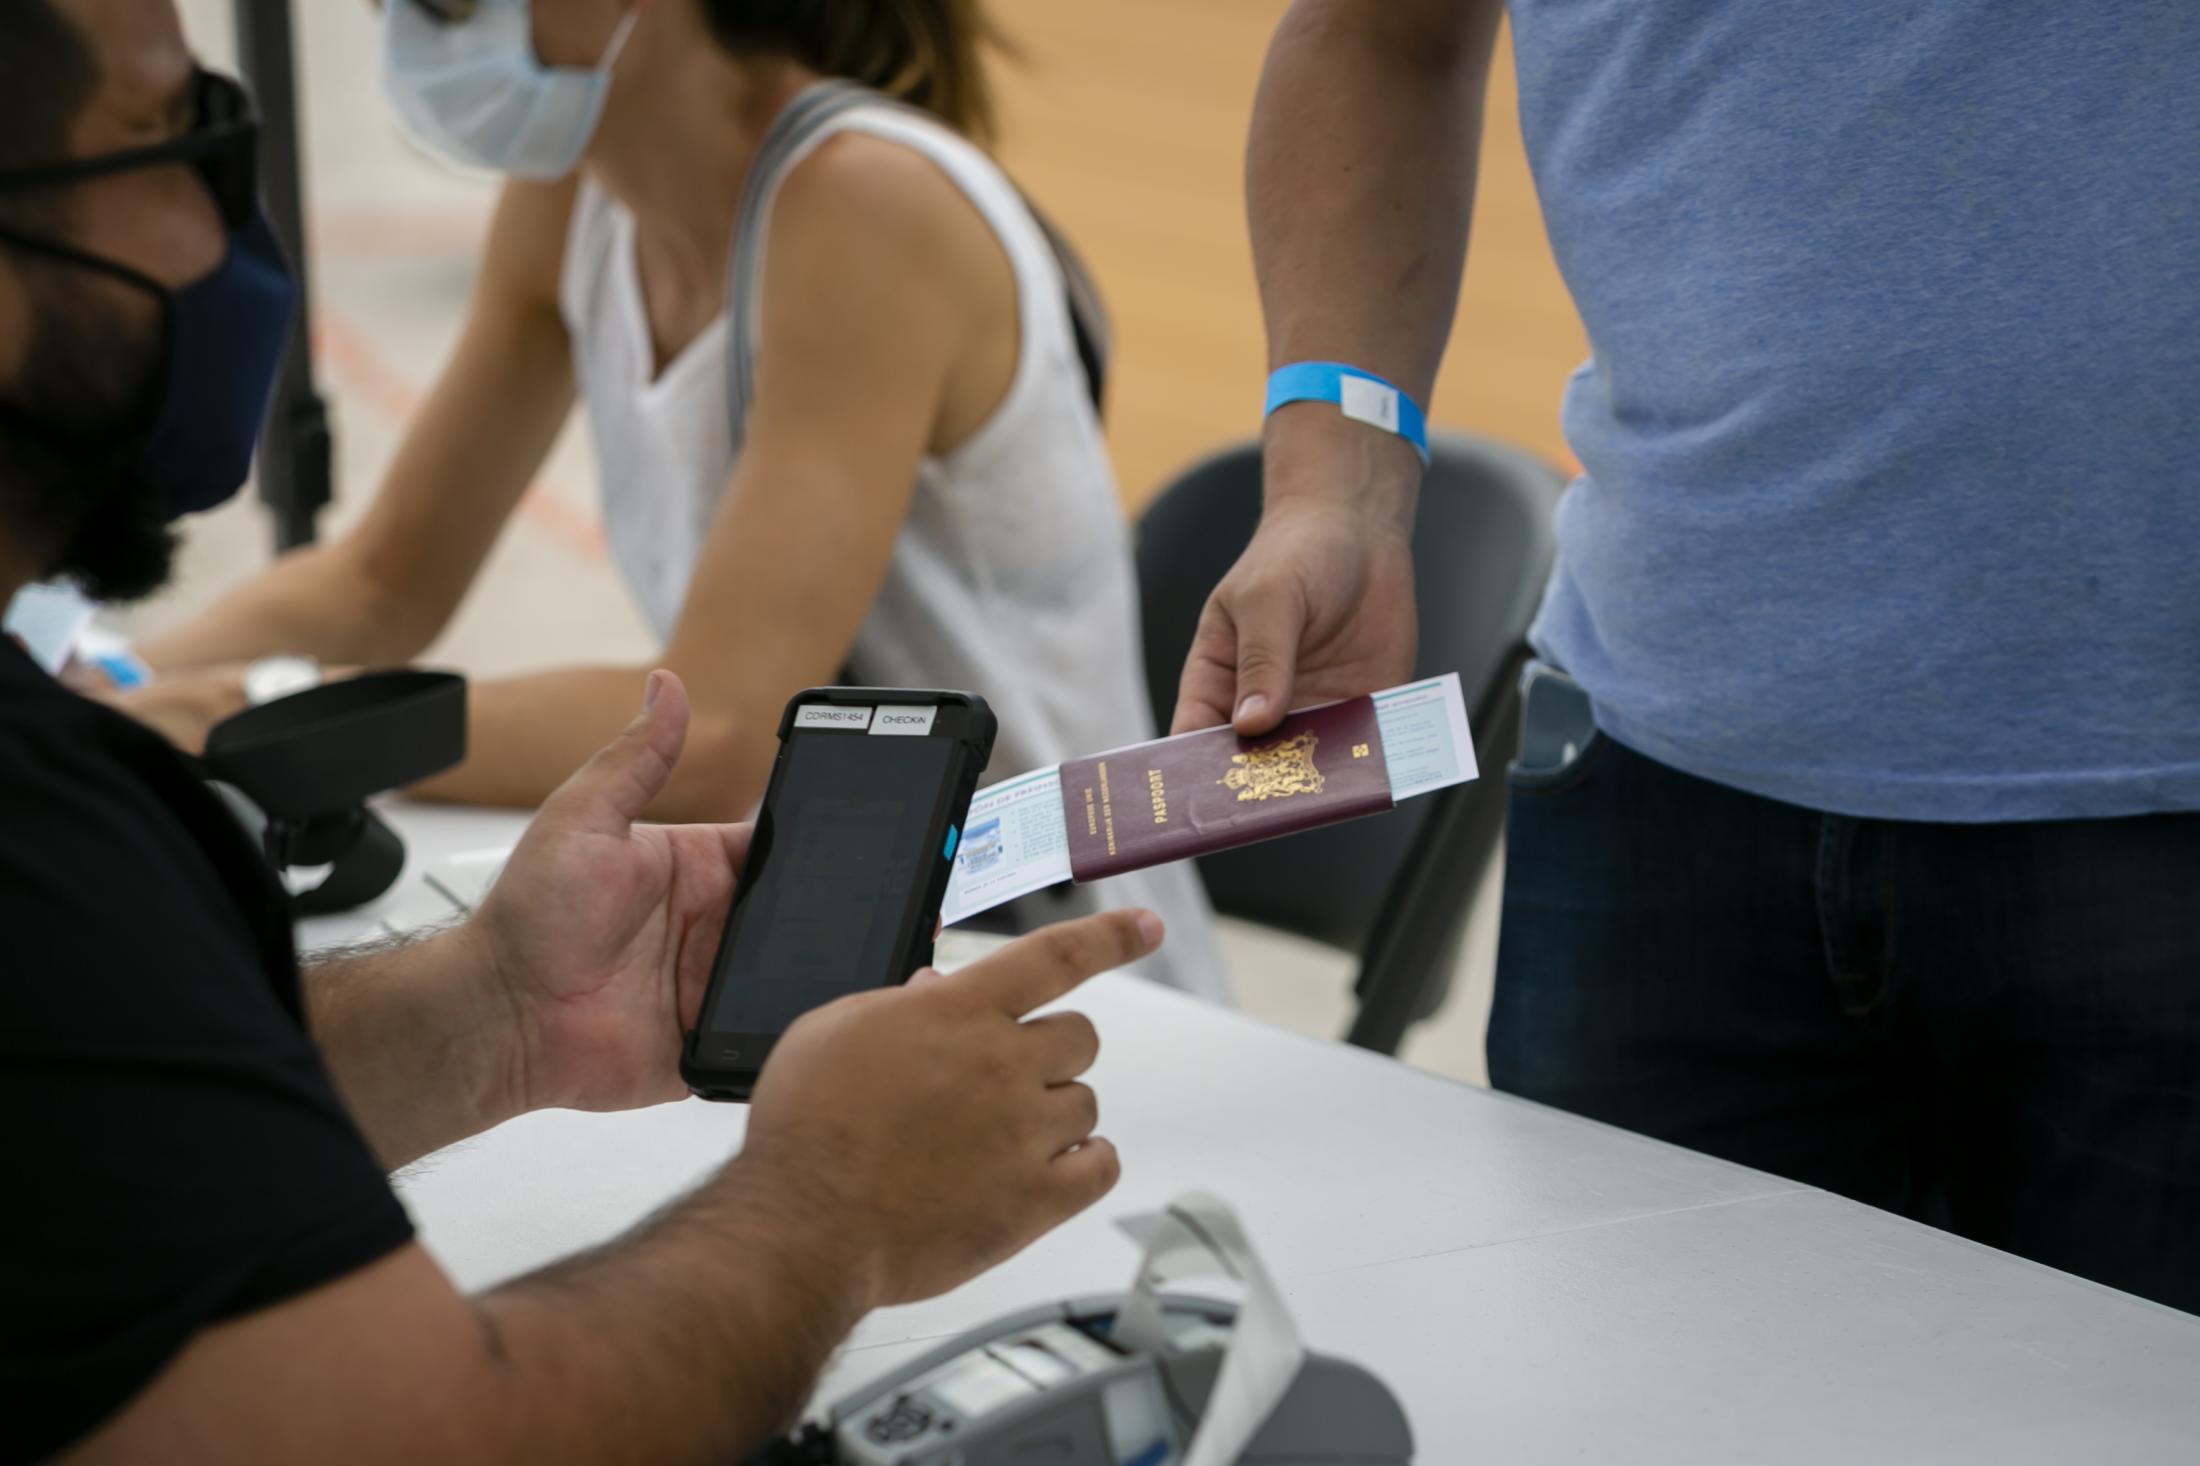 2021 - Tourists get Johnson & Johnson COVID-19 vaccine at Miami Beach - A man gives his passport for registration  to get Johnson...